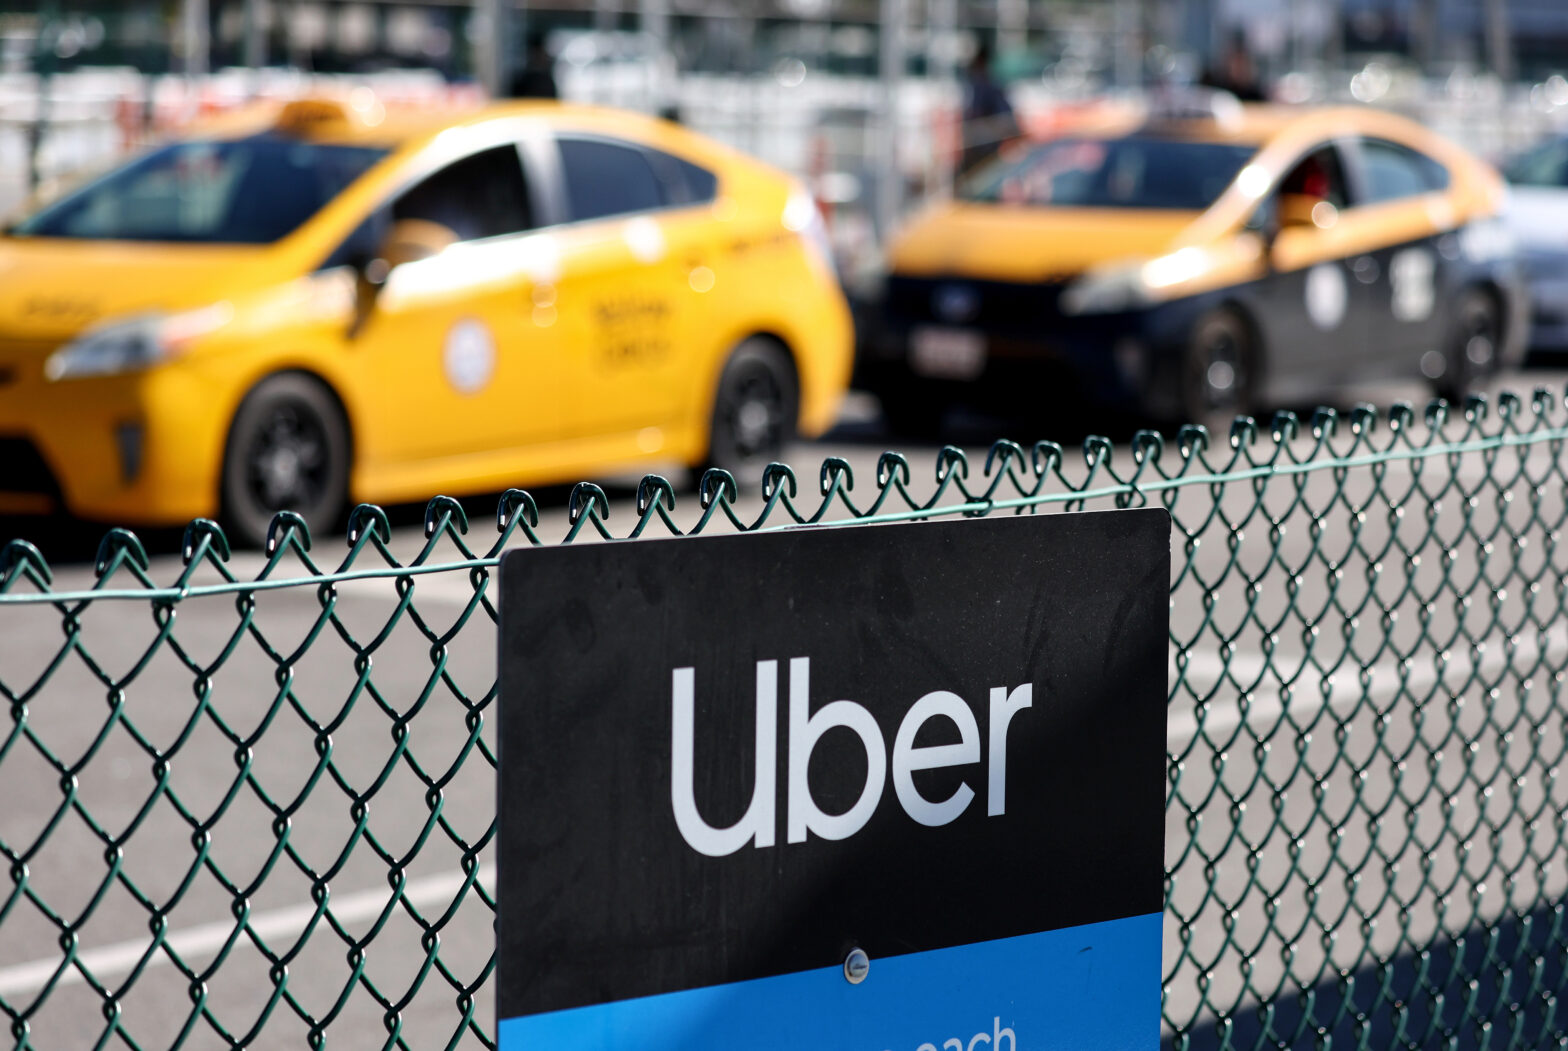 Uber Shuttle To Provide Budget-Friendly Rides To Airports And Event Venues